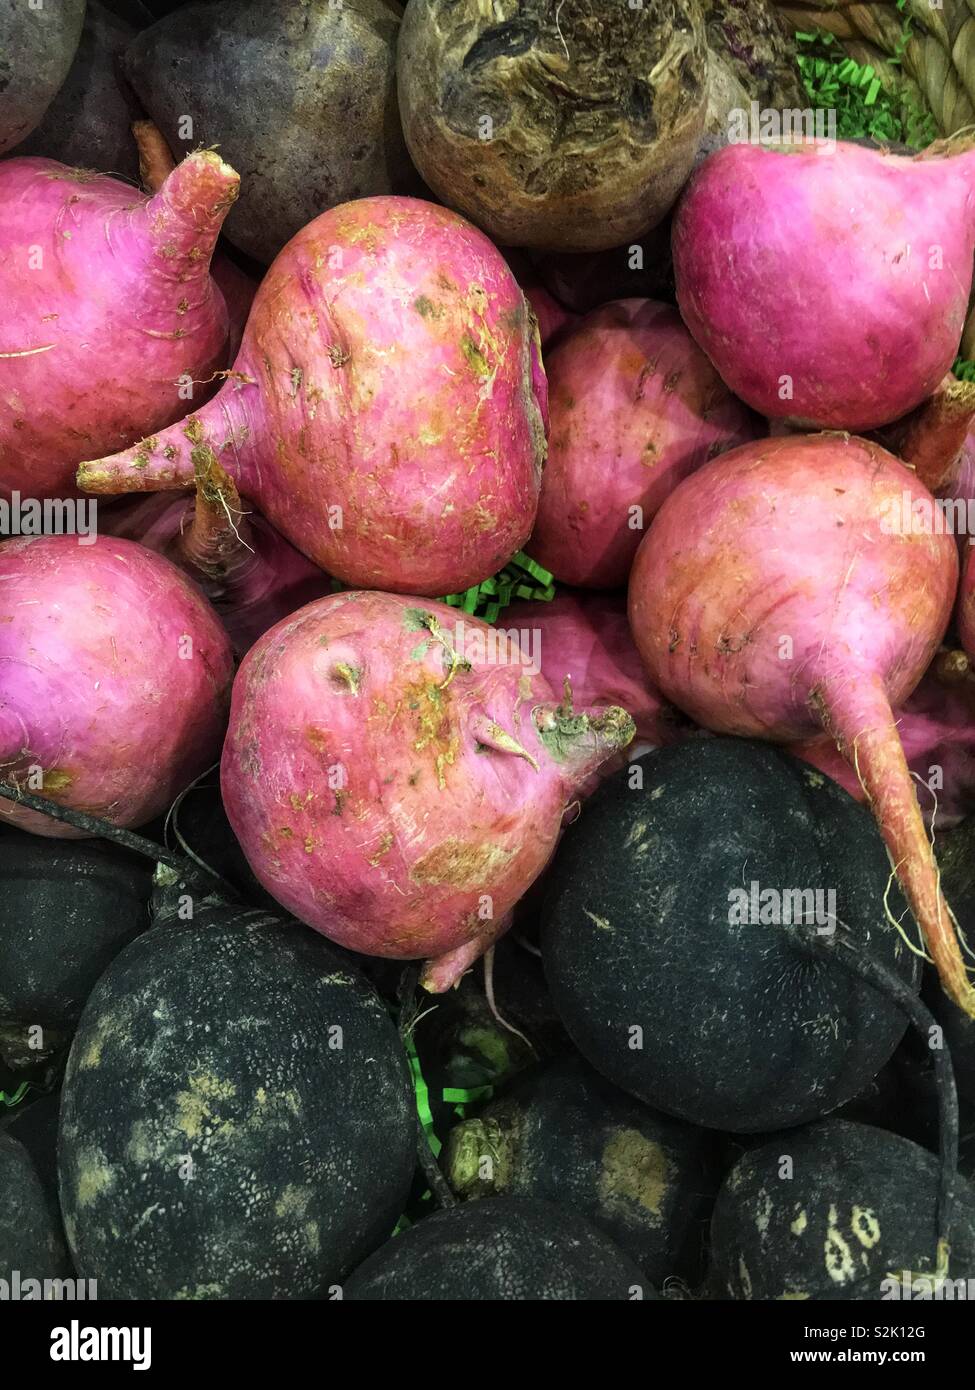 Fresh produce huge red and black radishes piled in a bin. Stock Photo